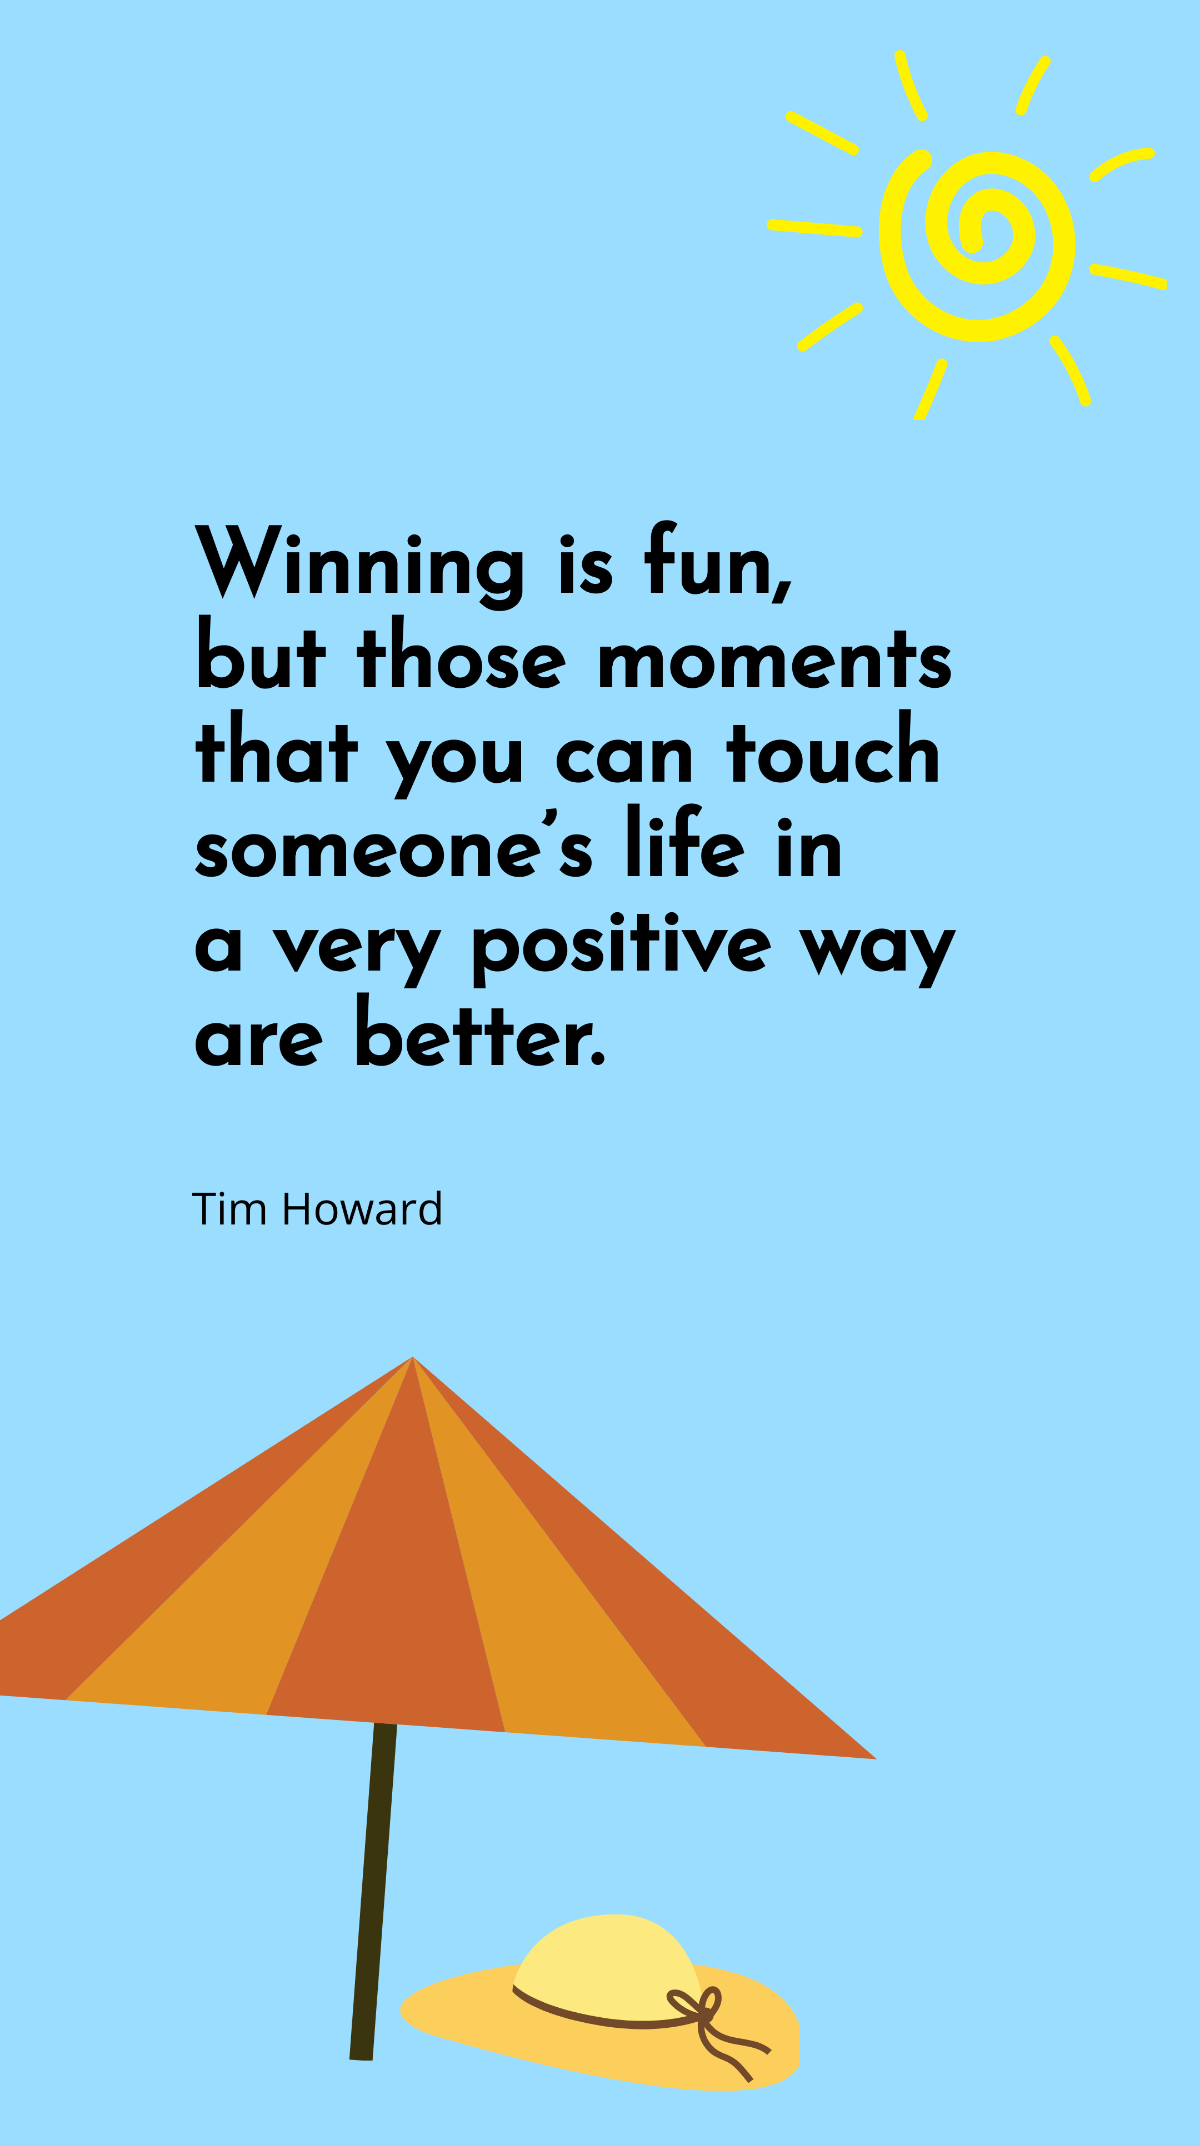 Tim Howard - Winning is fun, but those moments that you can touch someone’s life in a very positive way are better. Template